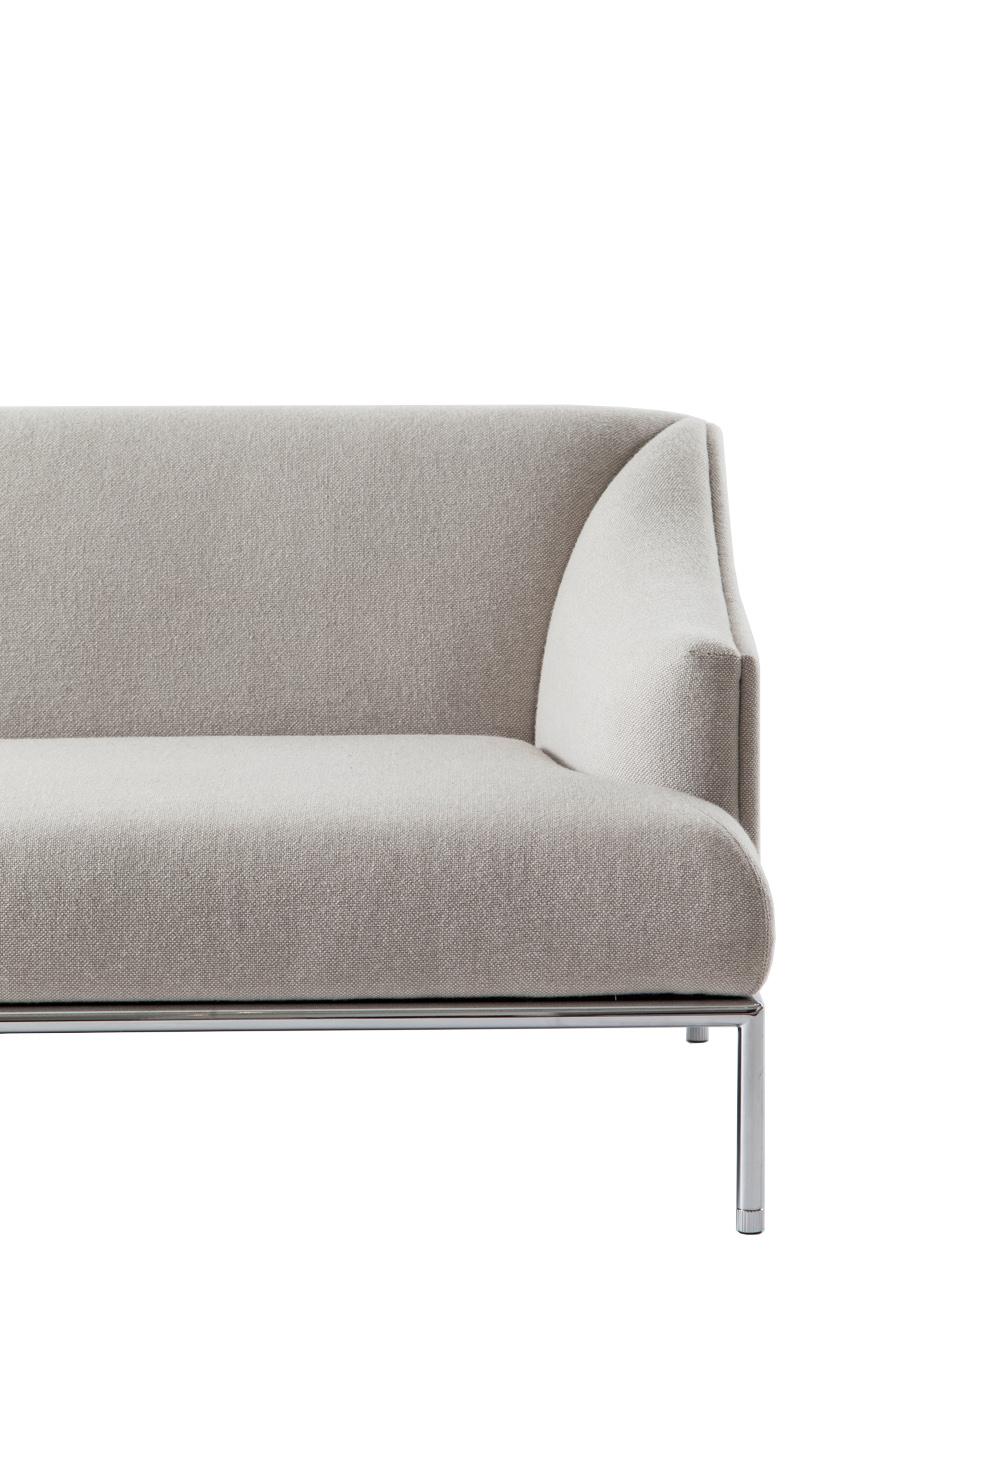 Beige (Hero - 800) Cappellini High Time Two-Seat Sofa in Fabric or Leather by Christophe Pillet 2